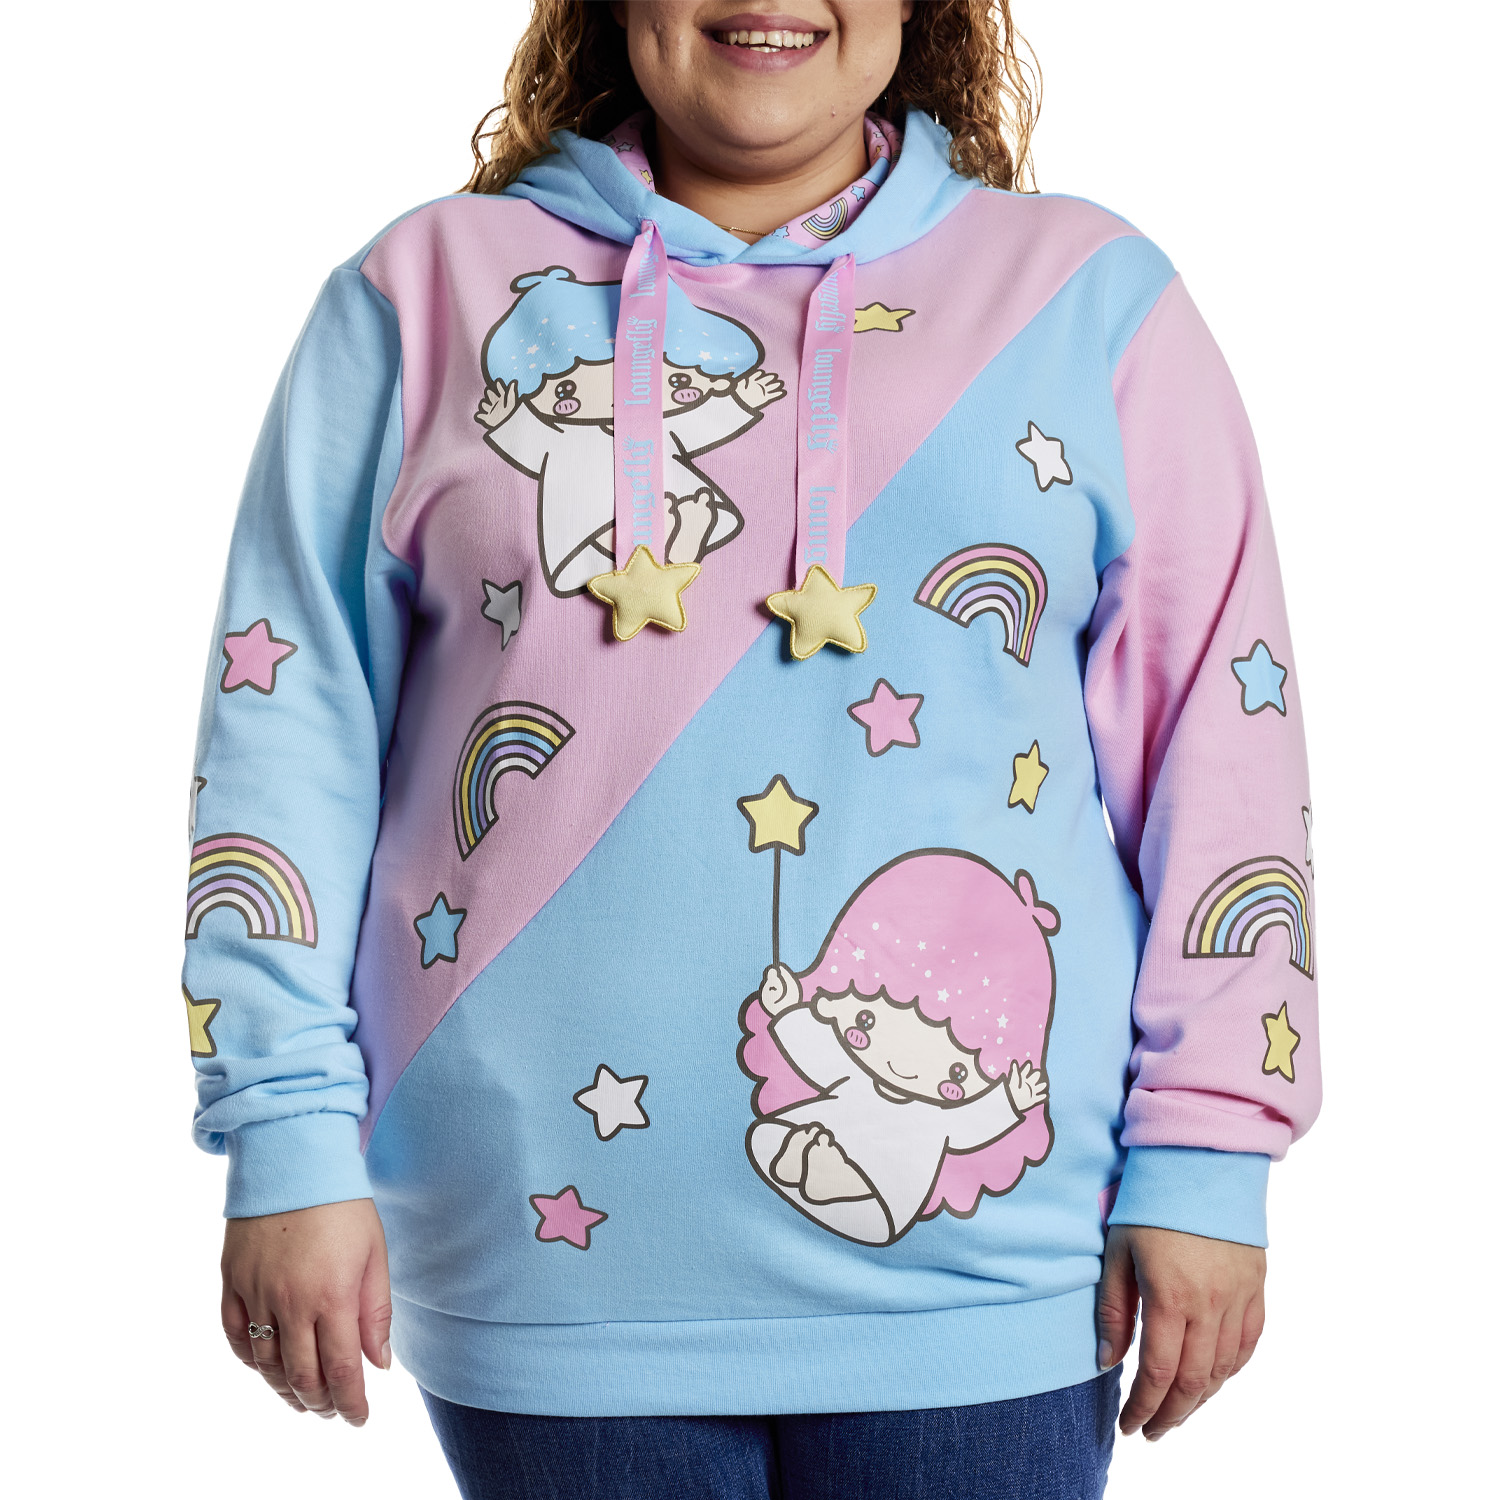 Buy Sanrio Little Twin Stars Carnival Unisex Hoodie at Loungefly.